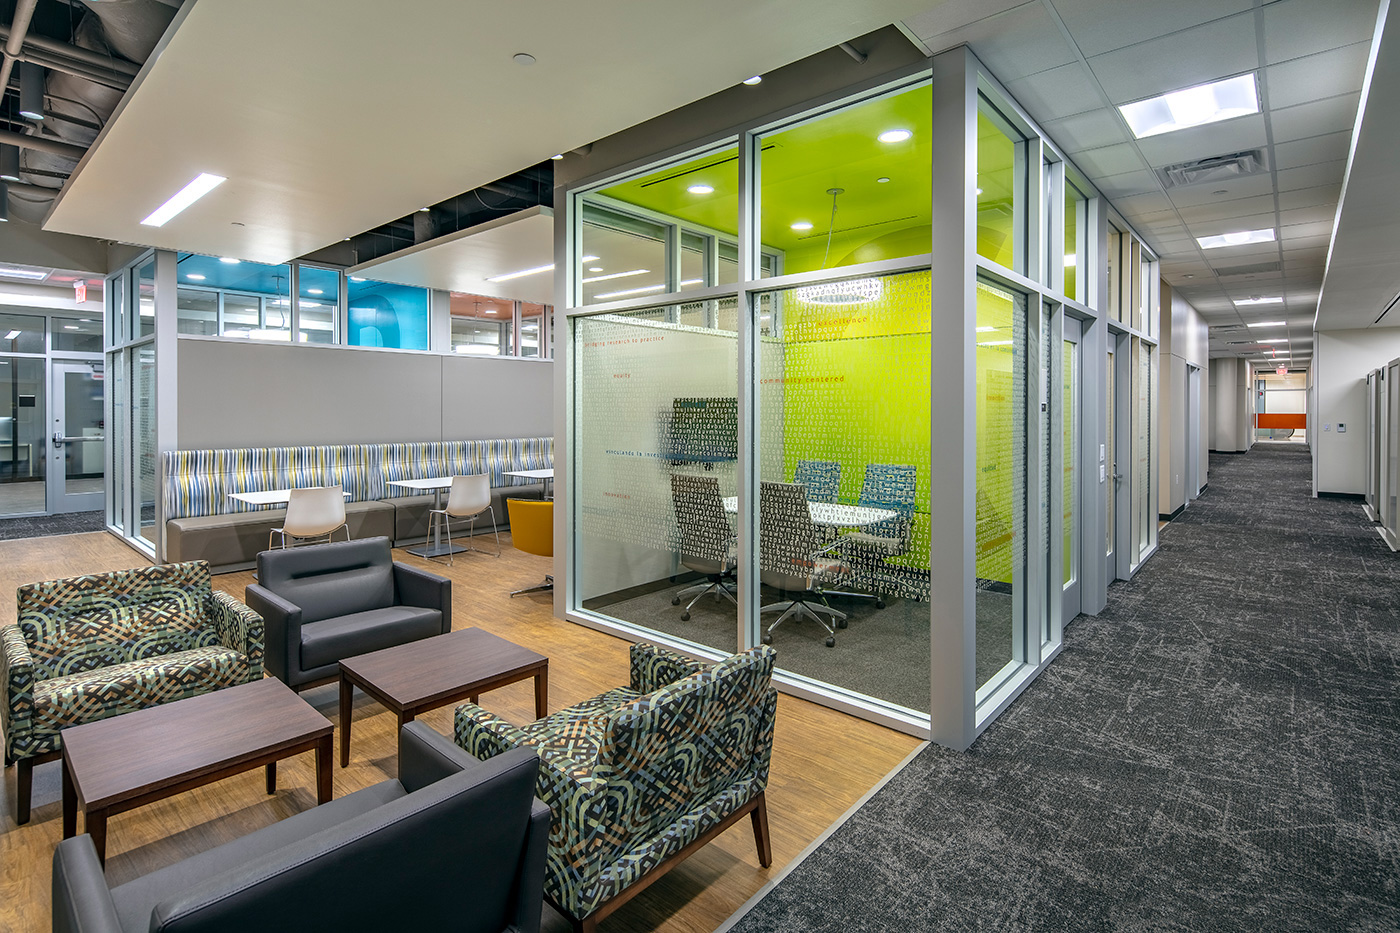 Offices interior with diverse seating space arrangements.